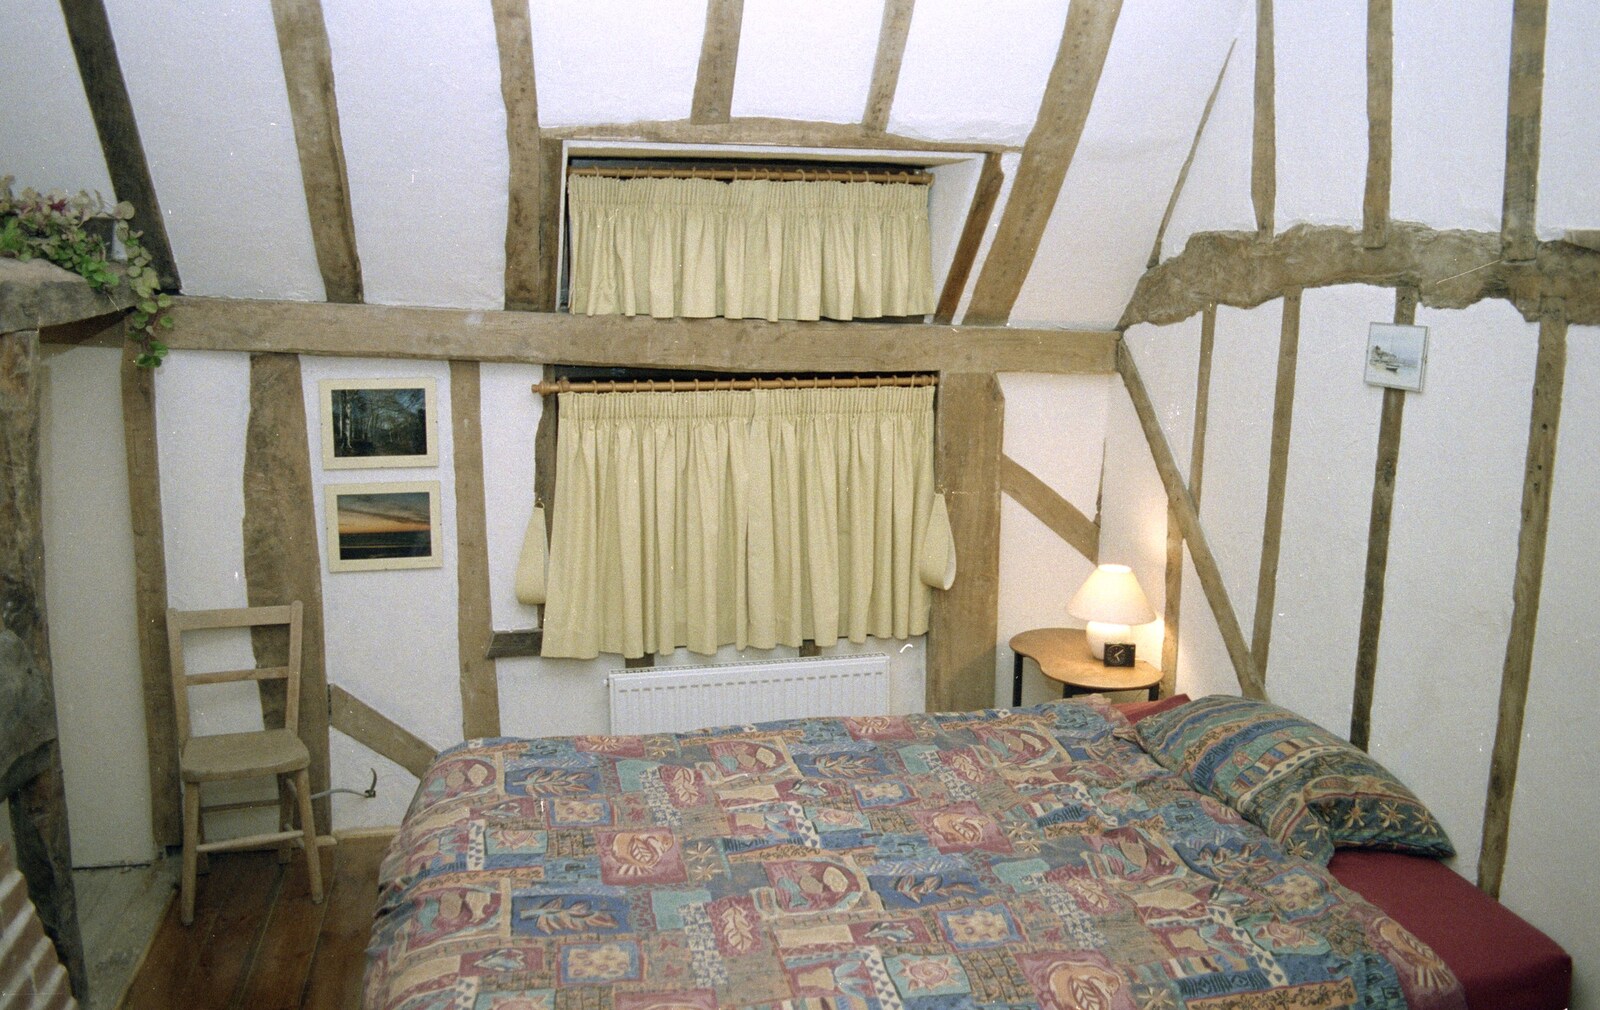 A bedroom photo from The CISU Internet Team, Bedroom Building and Ferries, Suffolk - 16th February 1996